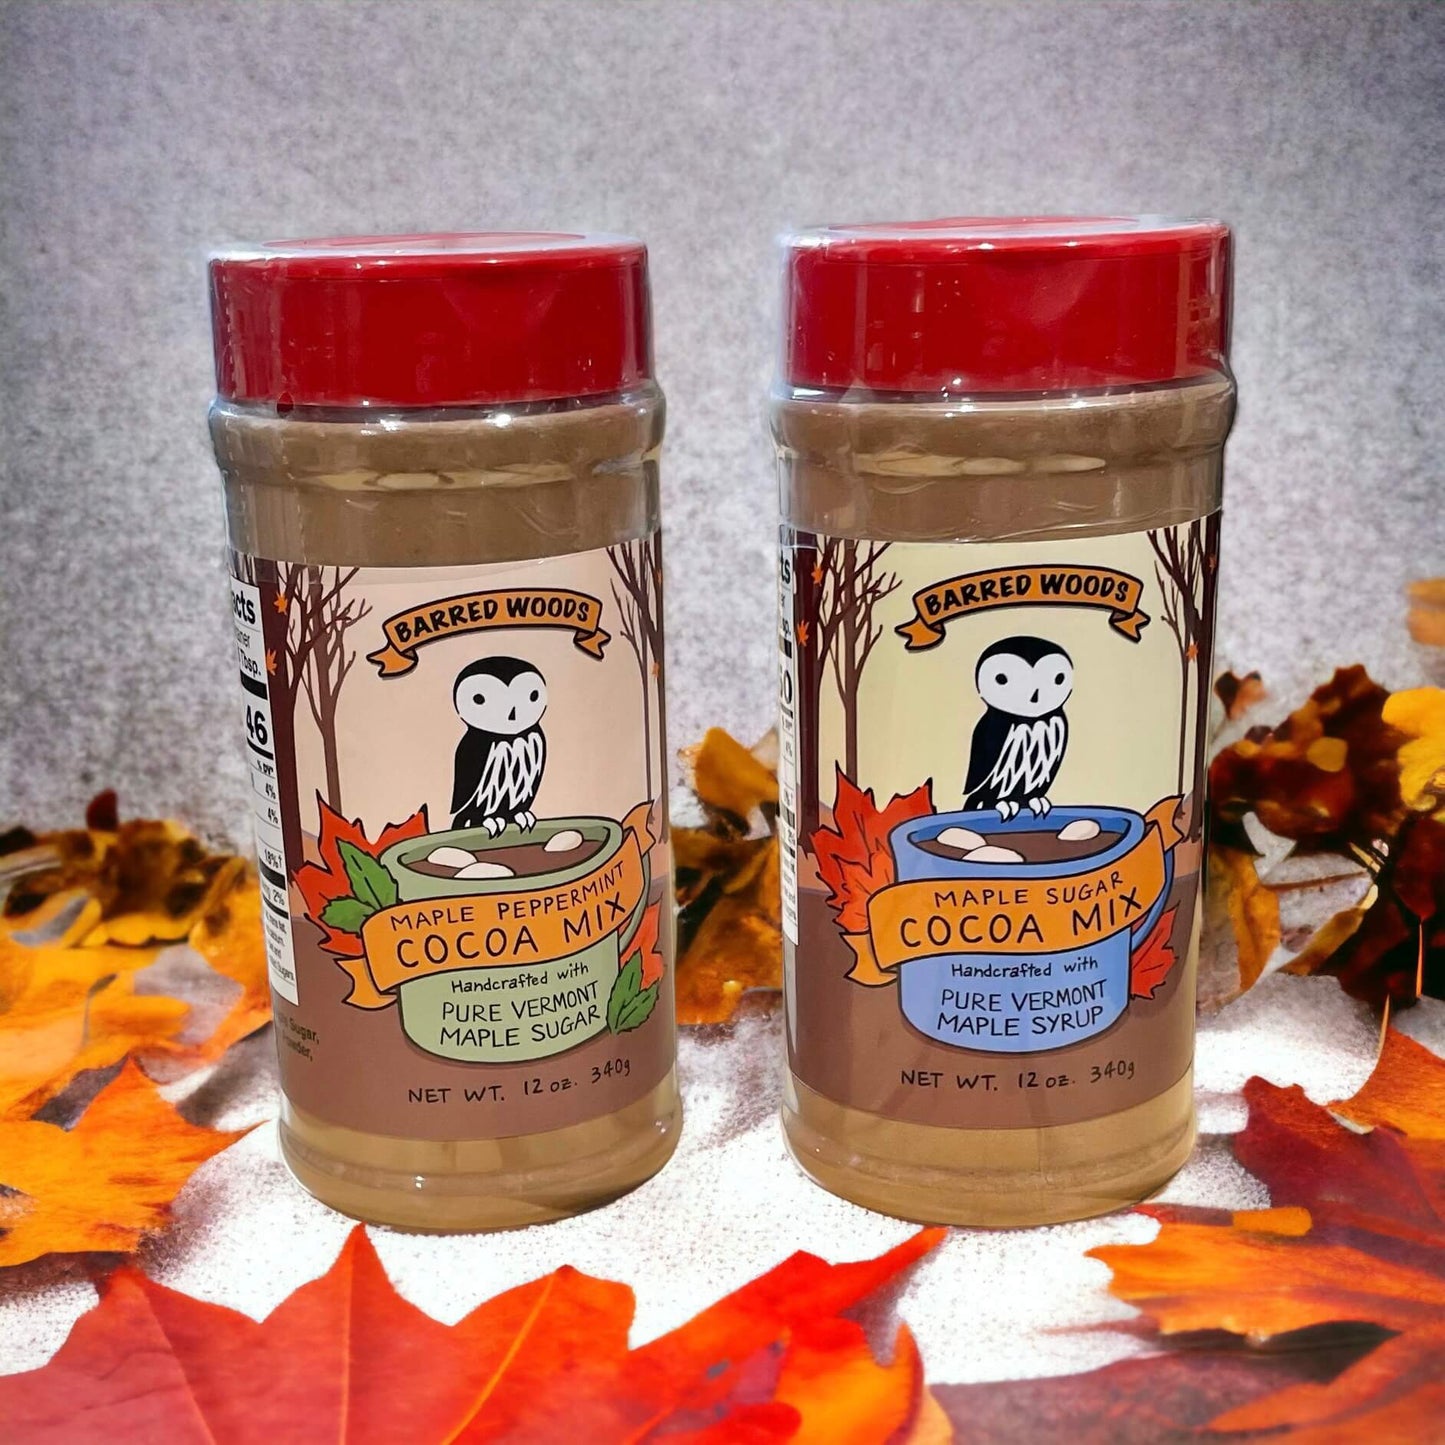 
                  
                    two jars of handcrafted maple cocoa mix as part of a cocoa mix gift set
                  
                